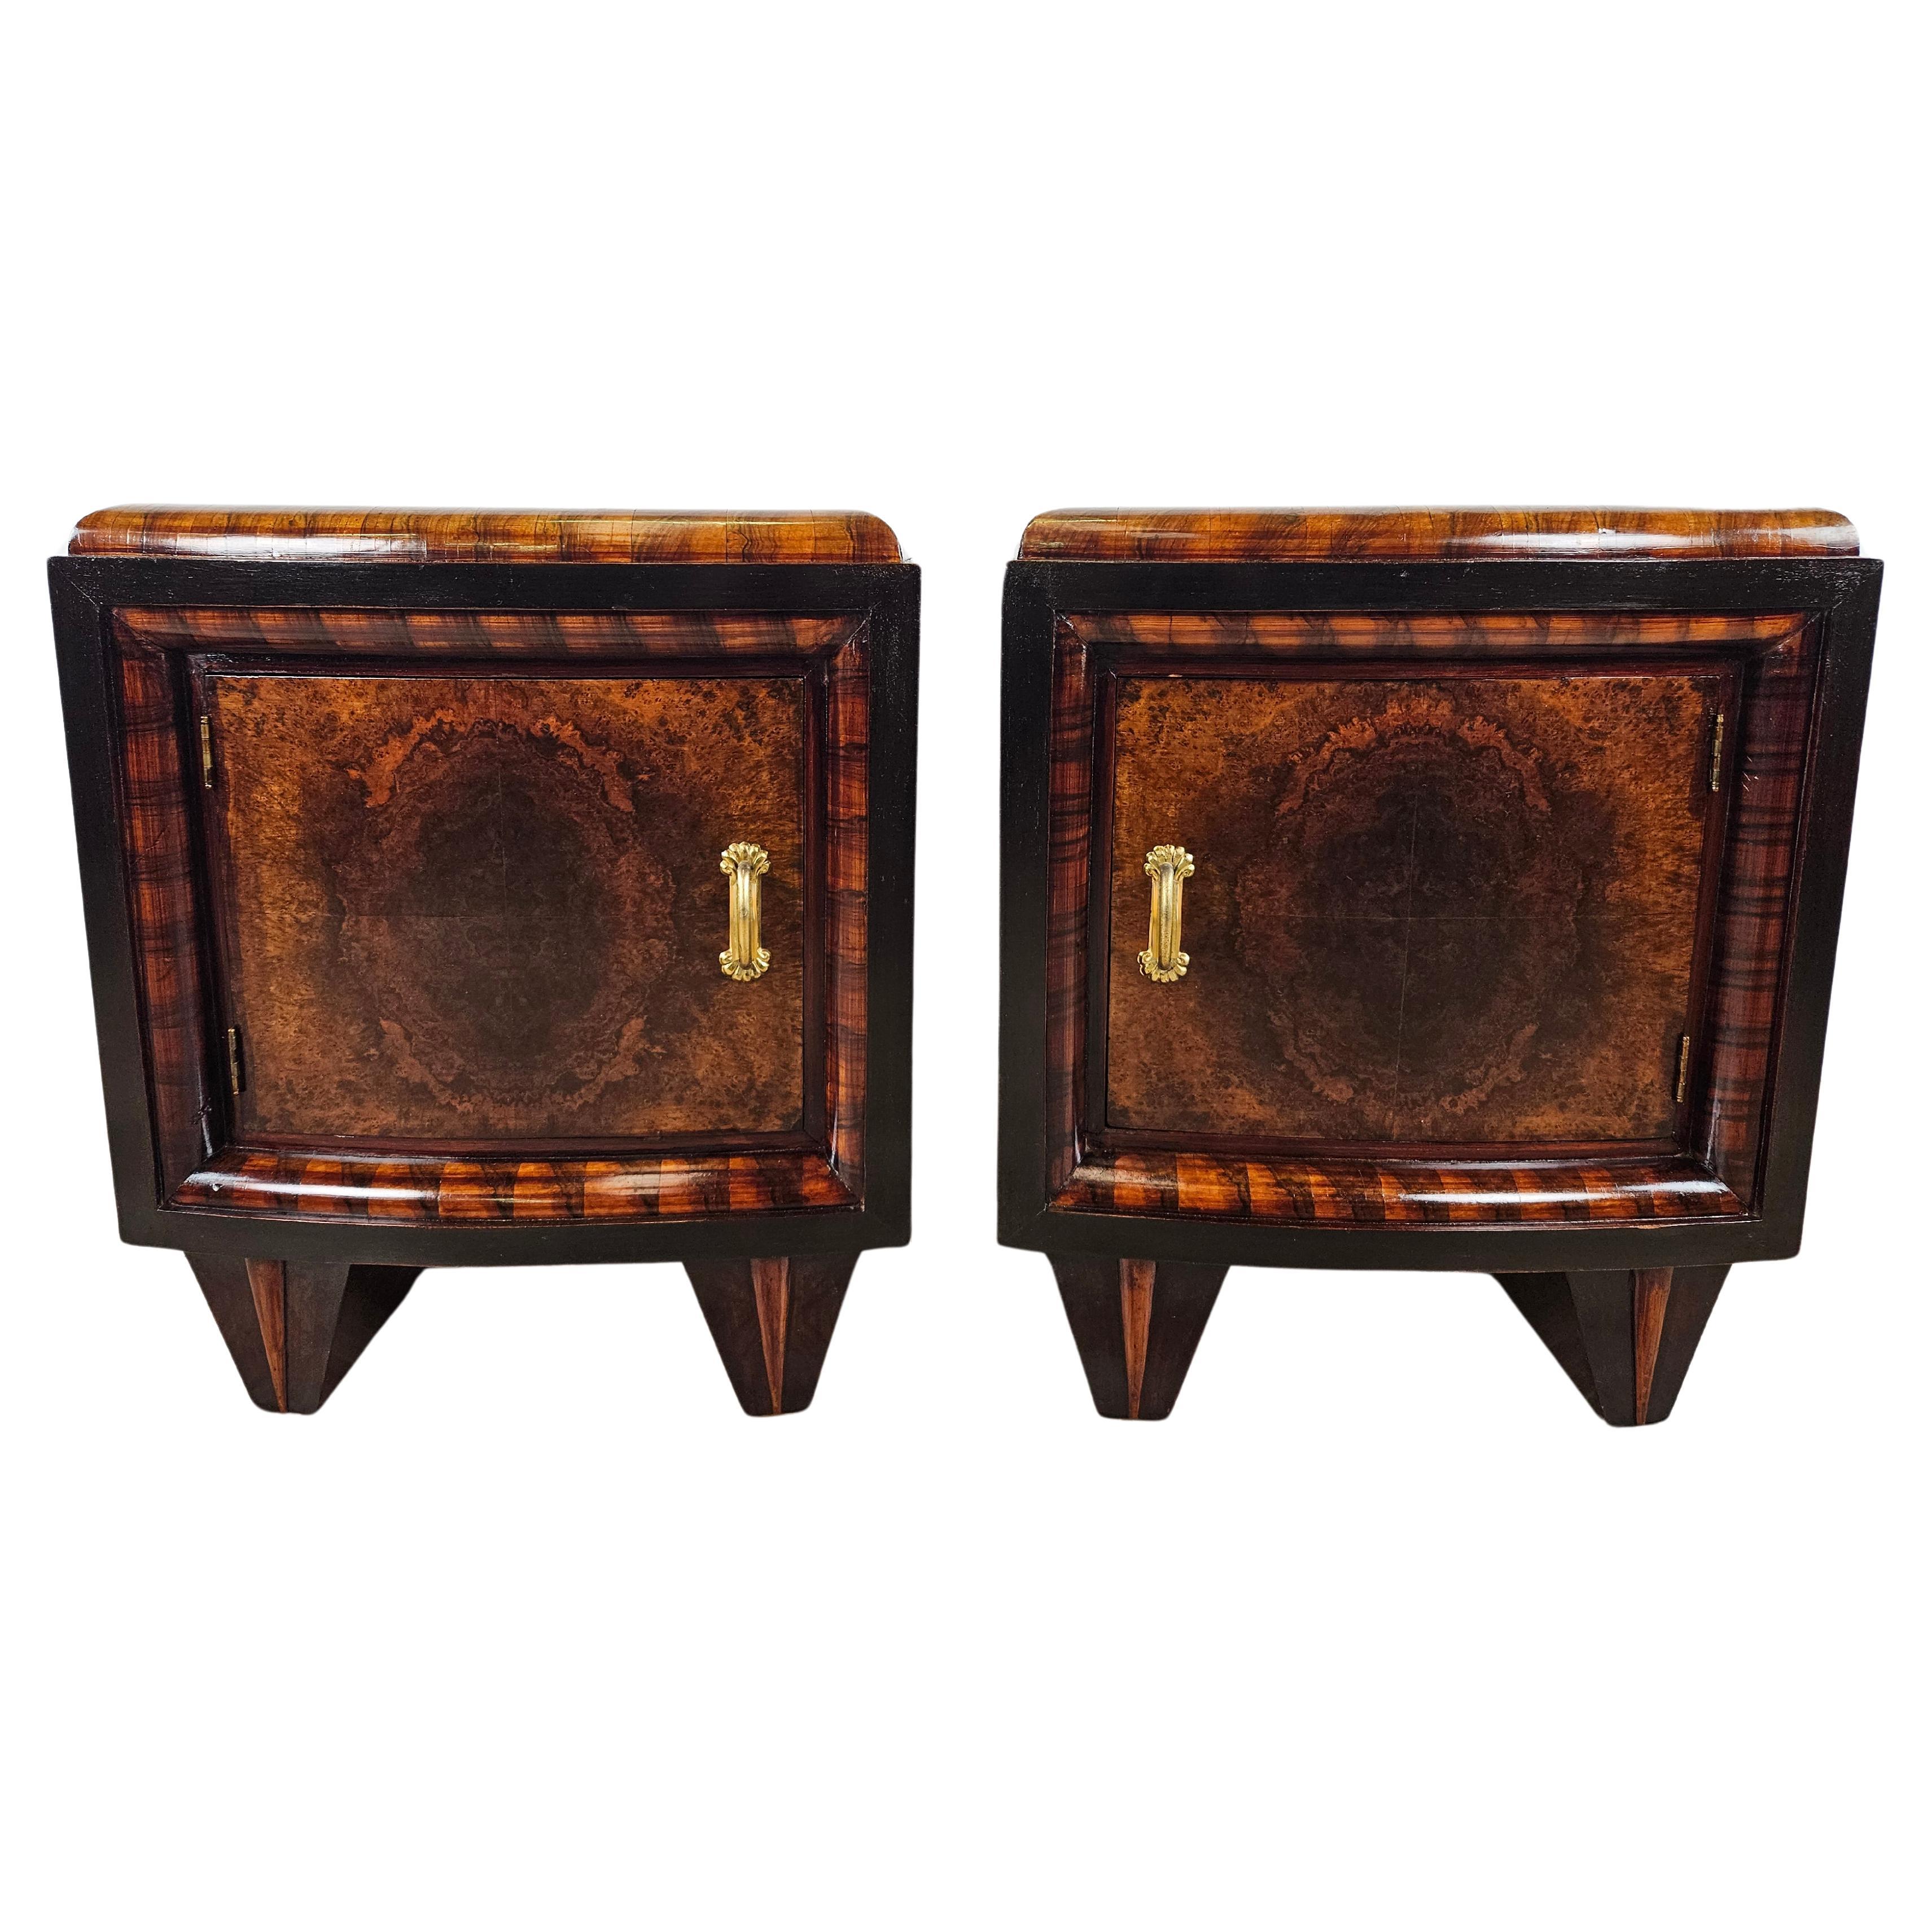 Pair of Art Deco bedside tables in mahogany burl 20th century